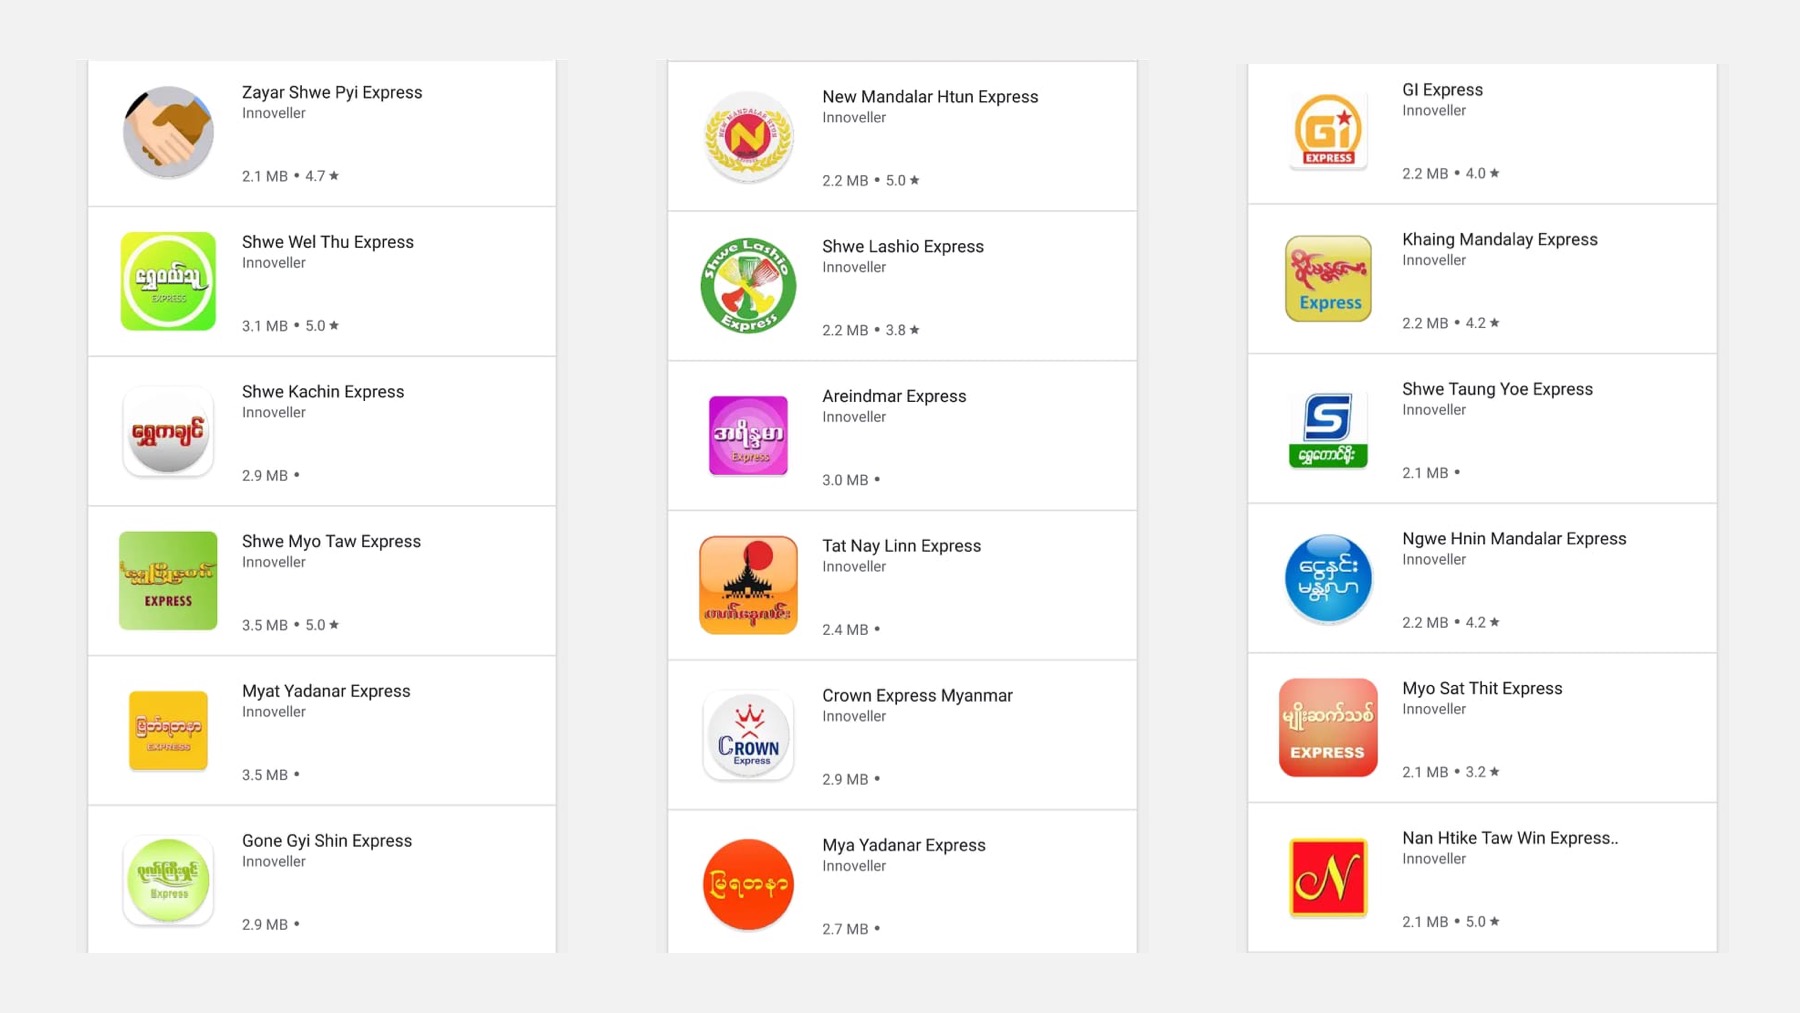 Bus operators' agent apps supported by Innoveller